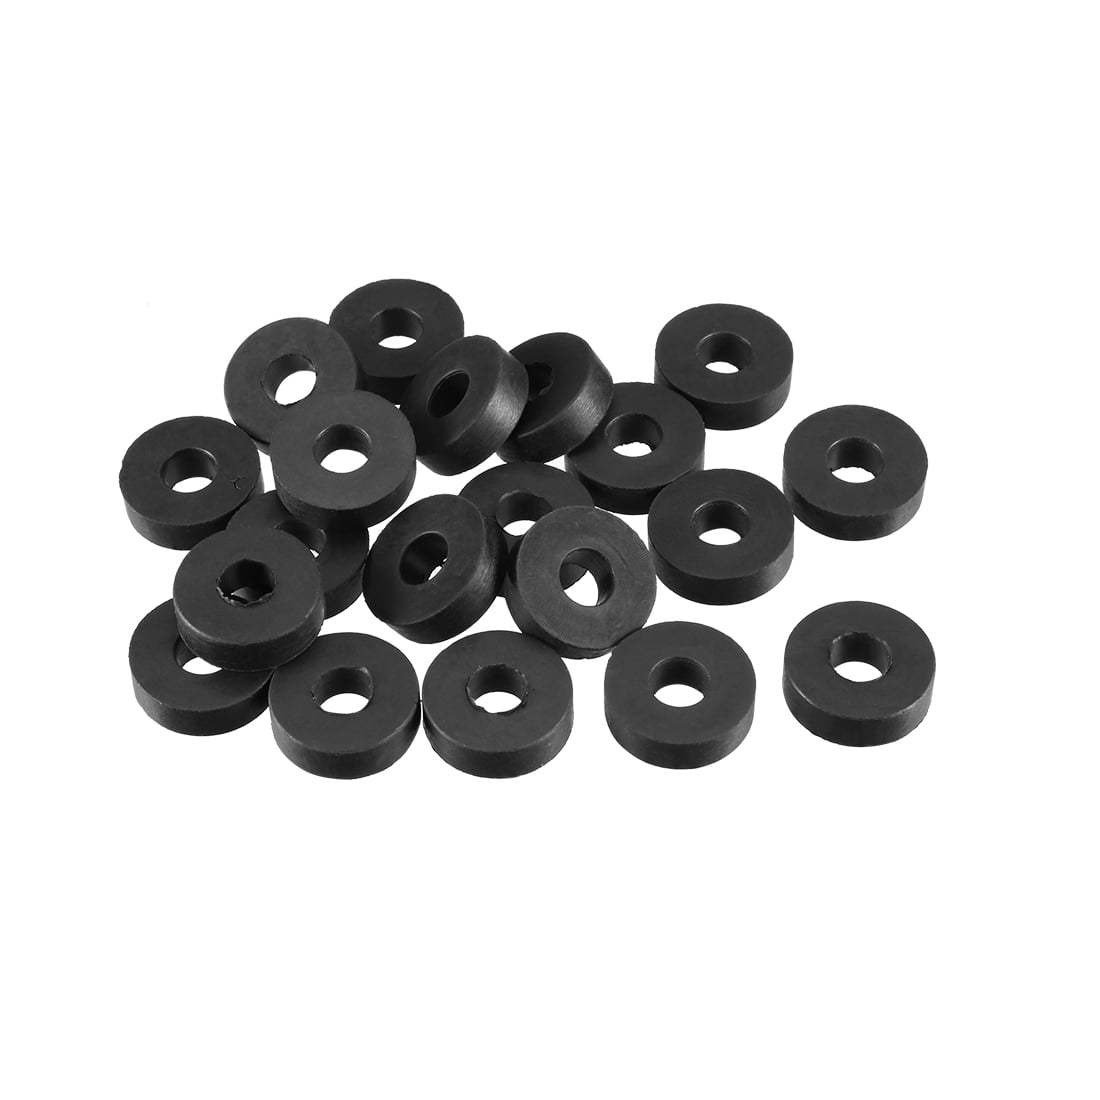 100 Flat Rubber Seals Hose Washers Pipe Water Tap O-Ring Gaskets Faucet Grommet 